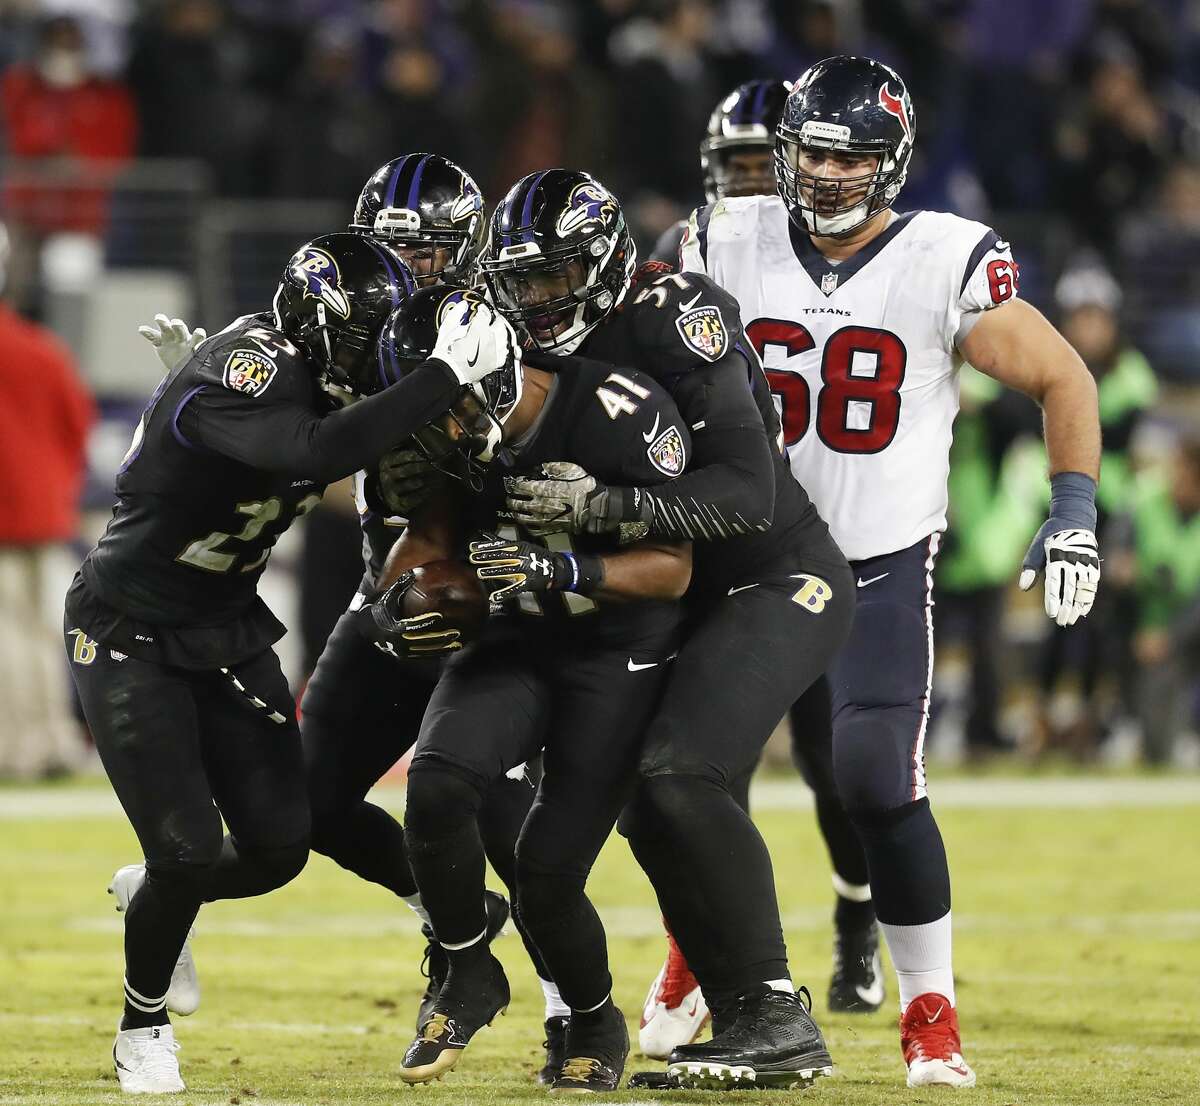 Baltimore Ravens cornerback Anthony Levine (41) celebrates his interception with teammates during the fourth quarter of an NFL football game at M & T Bank Stadium on Monday, Nov. 27, 2017, in Baltimore. ( Brett Coomer / Houston Chronicle )